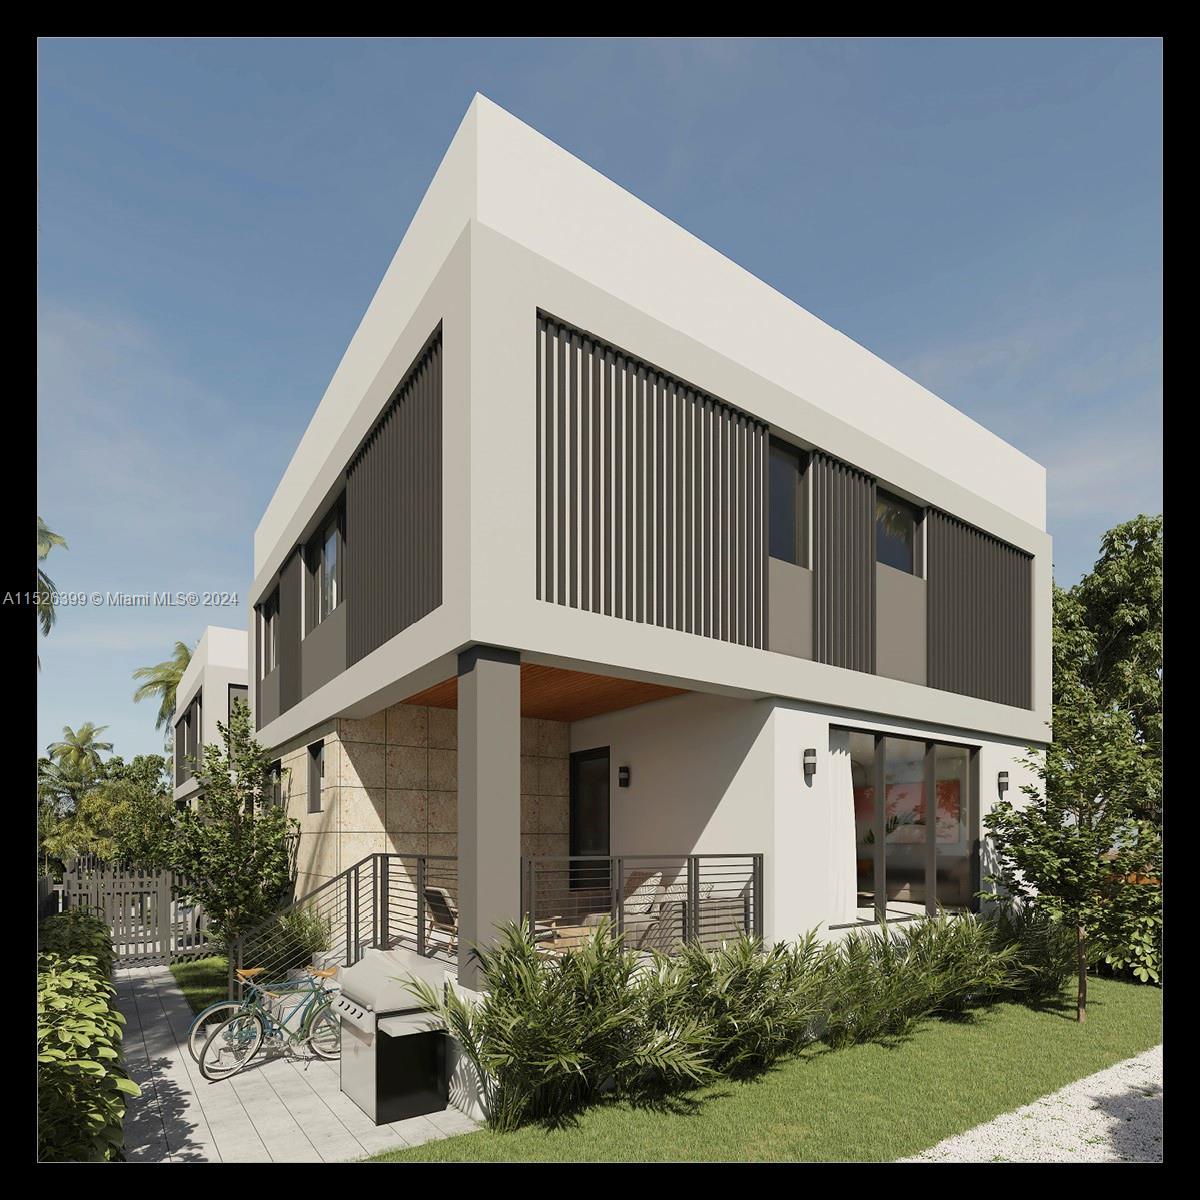 Introducing a luxurious new townhome, completing in Nov. 2024. This 5-bed, 5-bath residence features